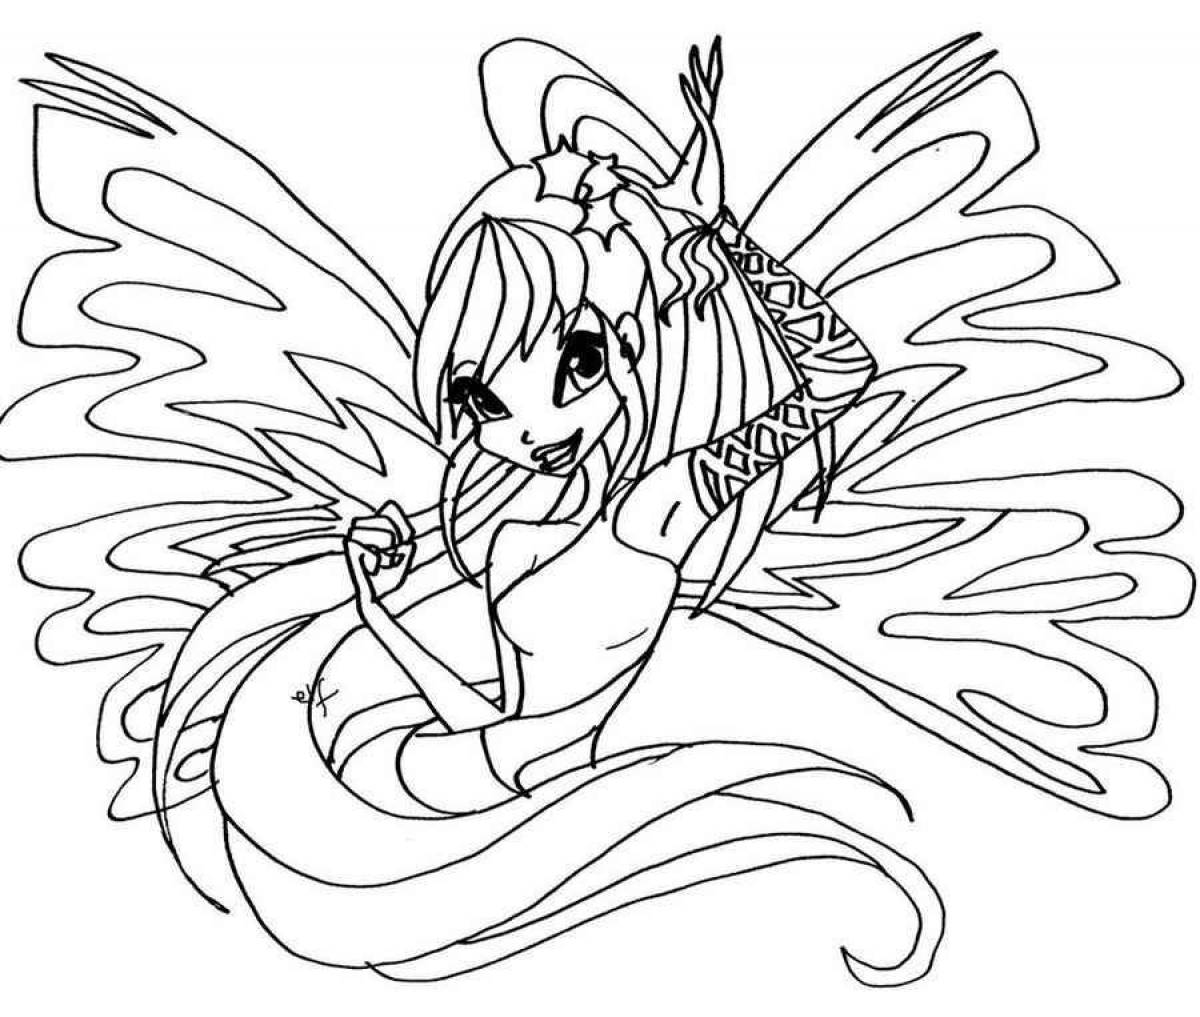 Great winx club coloring book